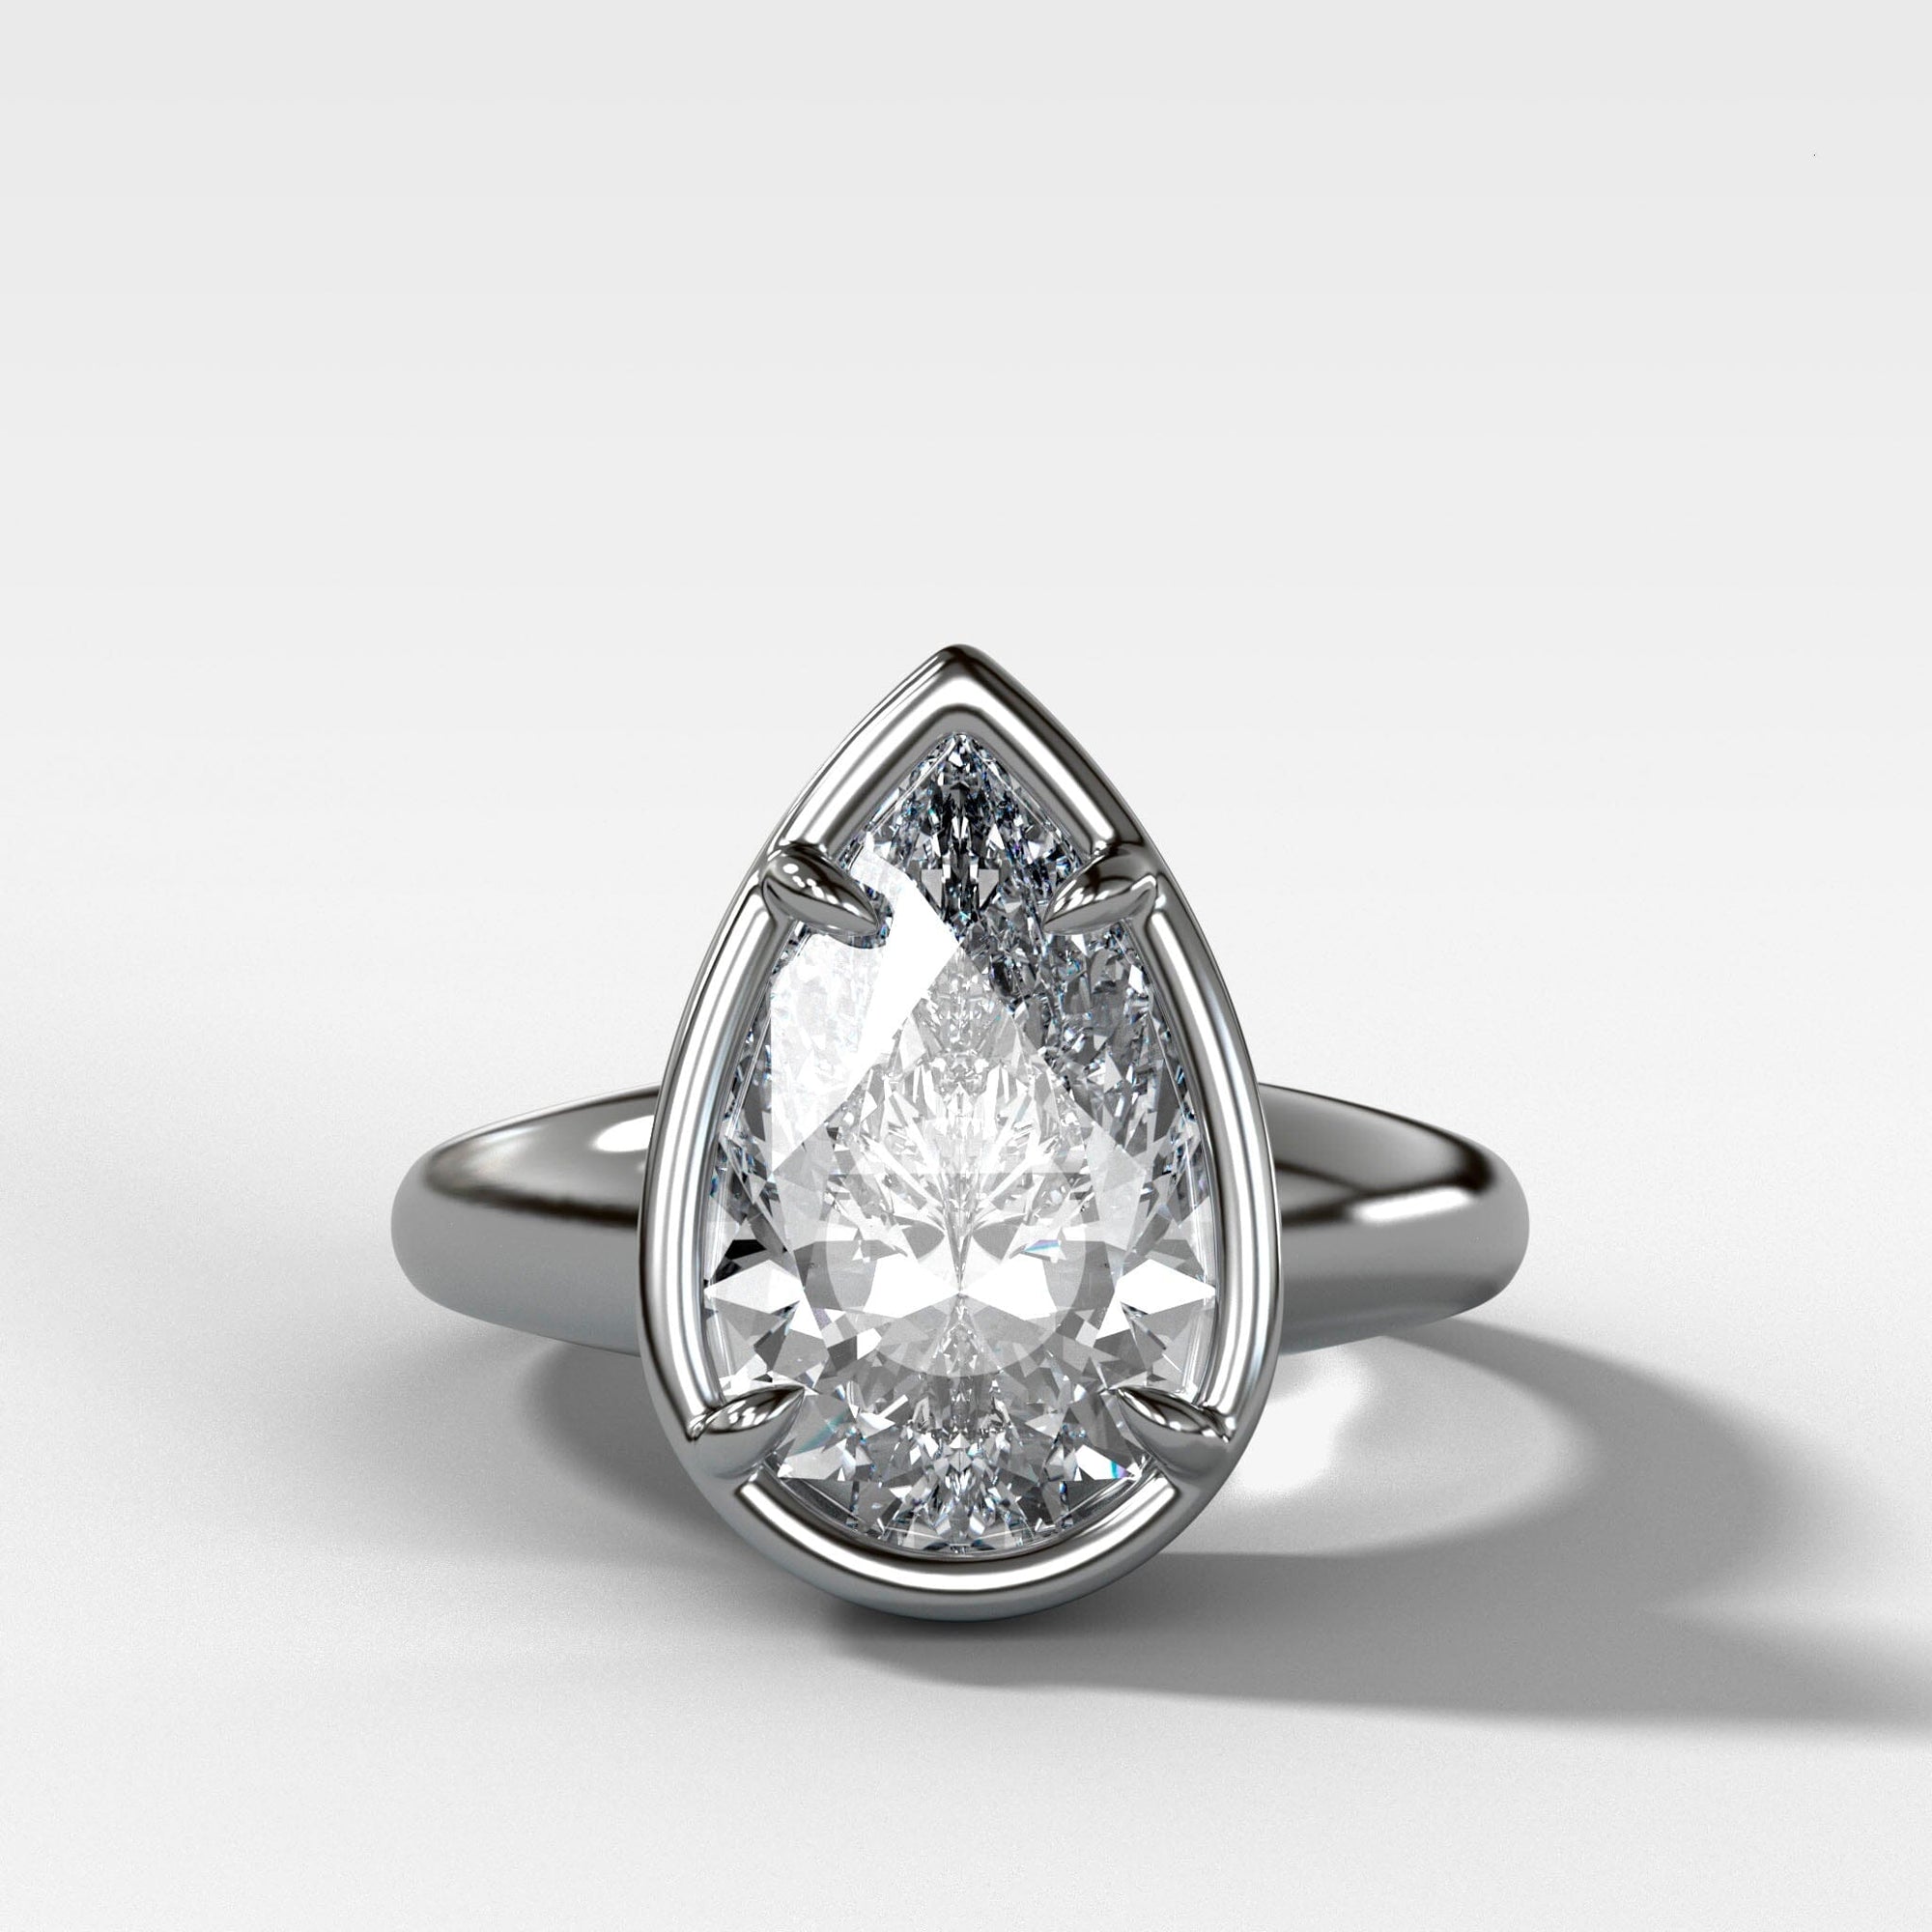 Club Ring Solitaire With a Pear Cut Engagement Good Stone Inc 